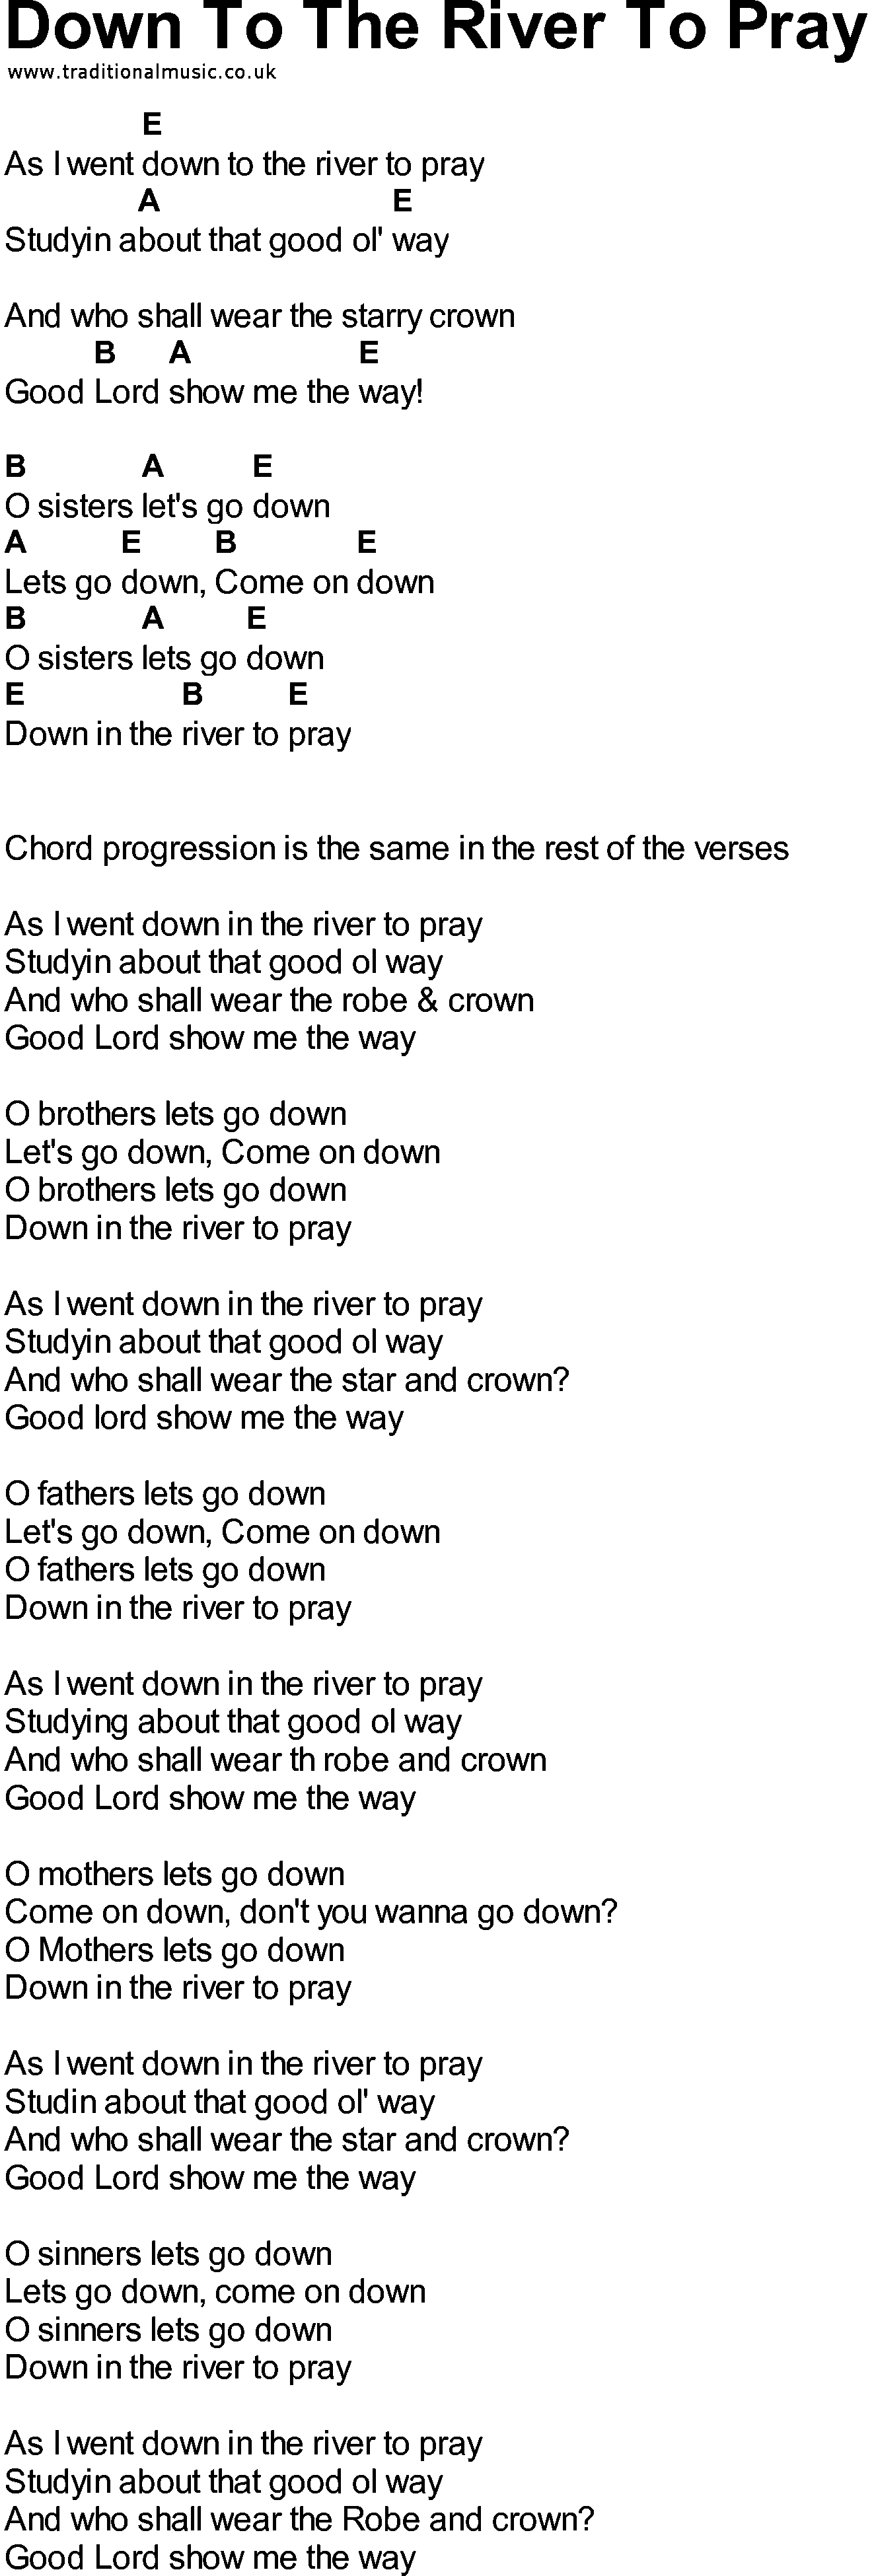 Bluegrass songs with chords - Down To The River To Pray